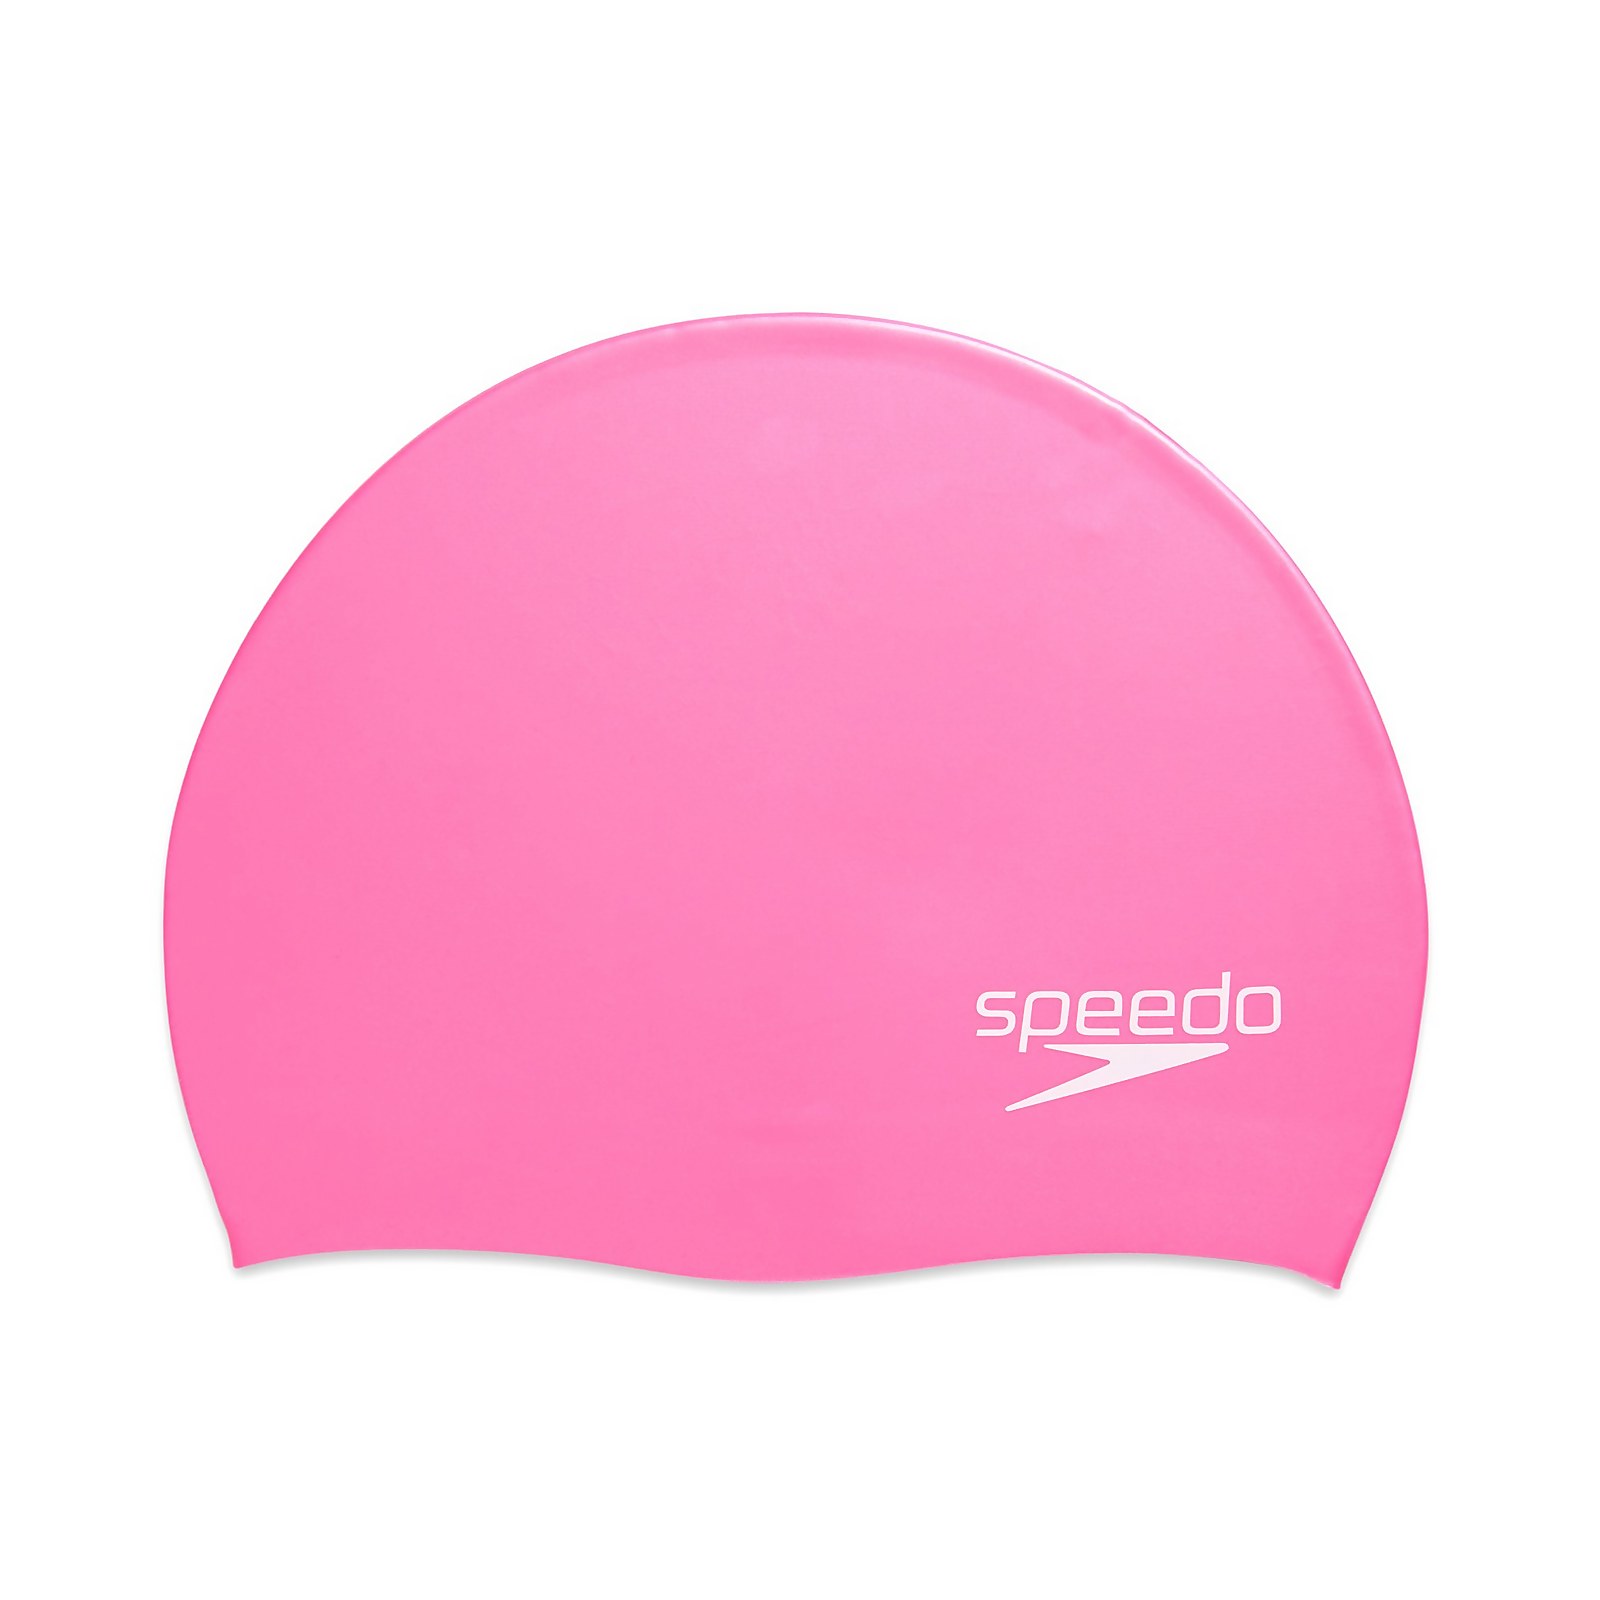 Speedo  Solid Silicone Cap - Elastomeric Fit - One Size    : Pink (13236275 5053744805795) photo